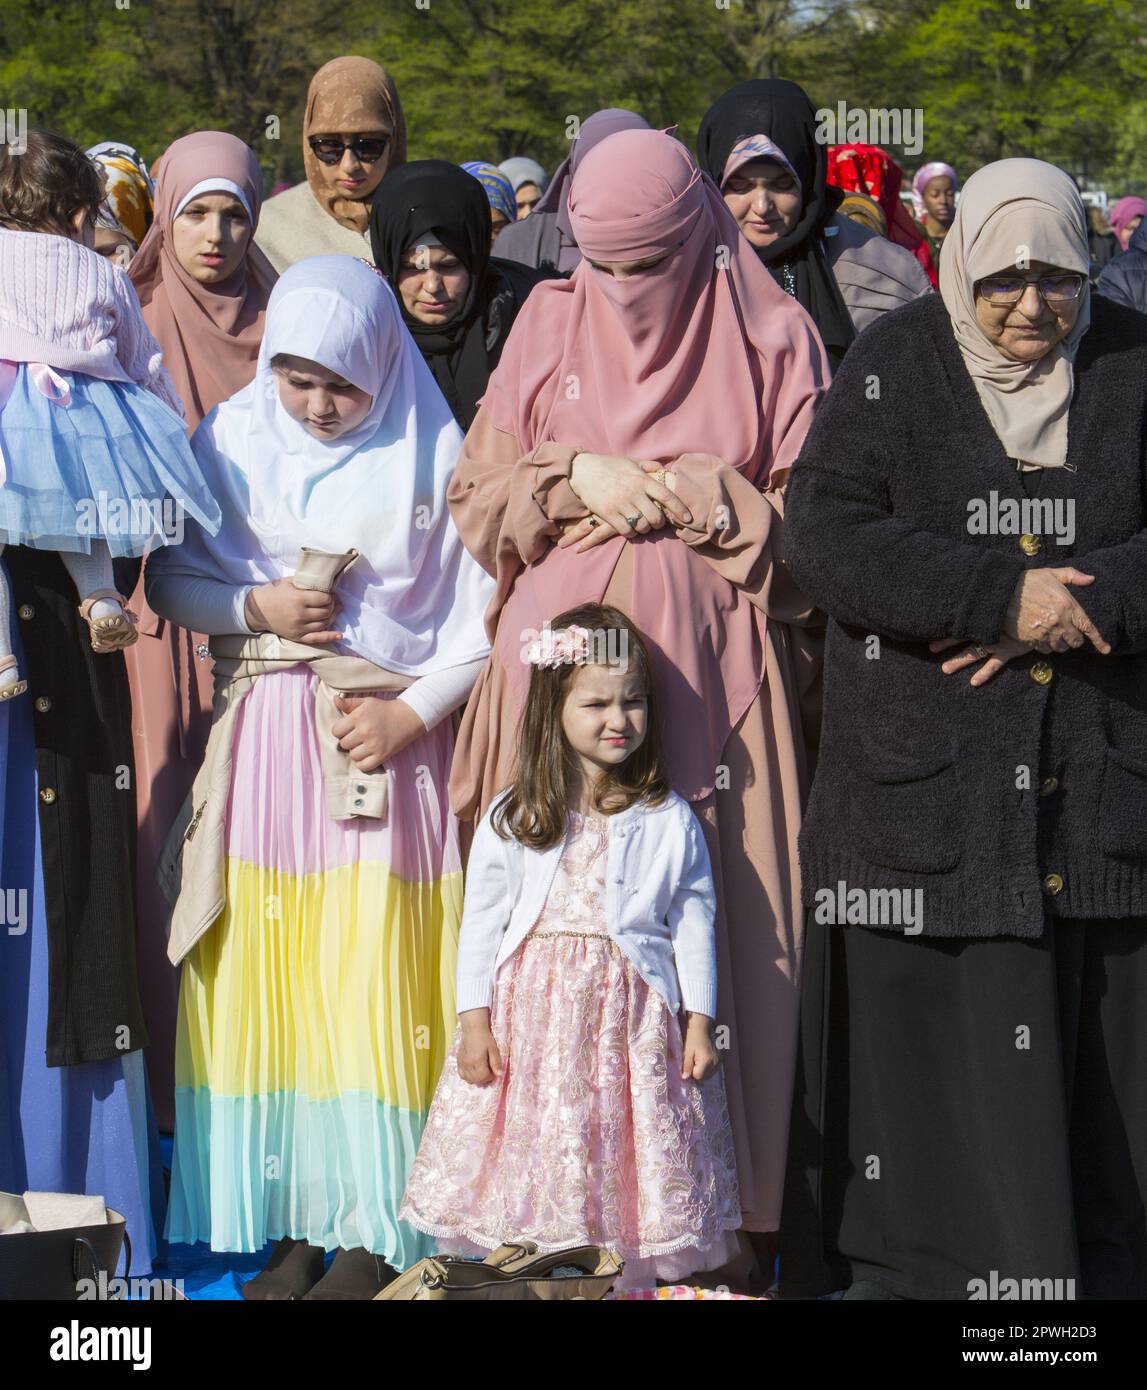 Muslims from various mosques in Brooklyn attend a prayer service on Eid at the end of Ramadan in Prospect Park, Brooklyn, New York. Stock Photo